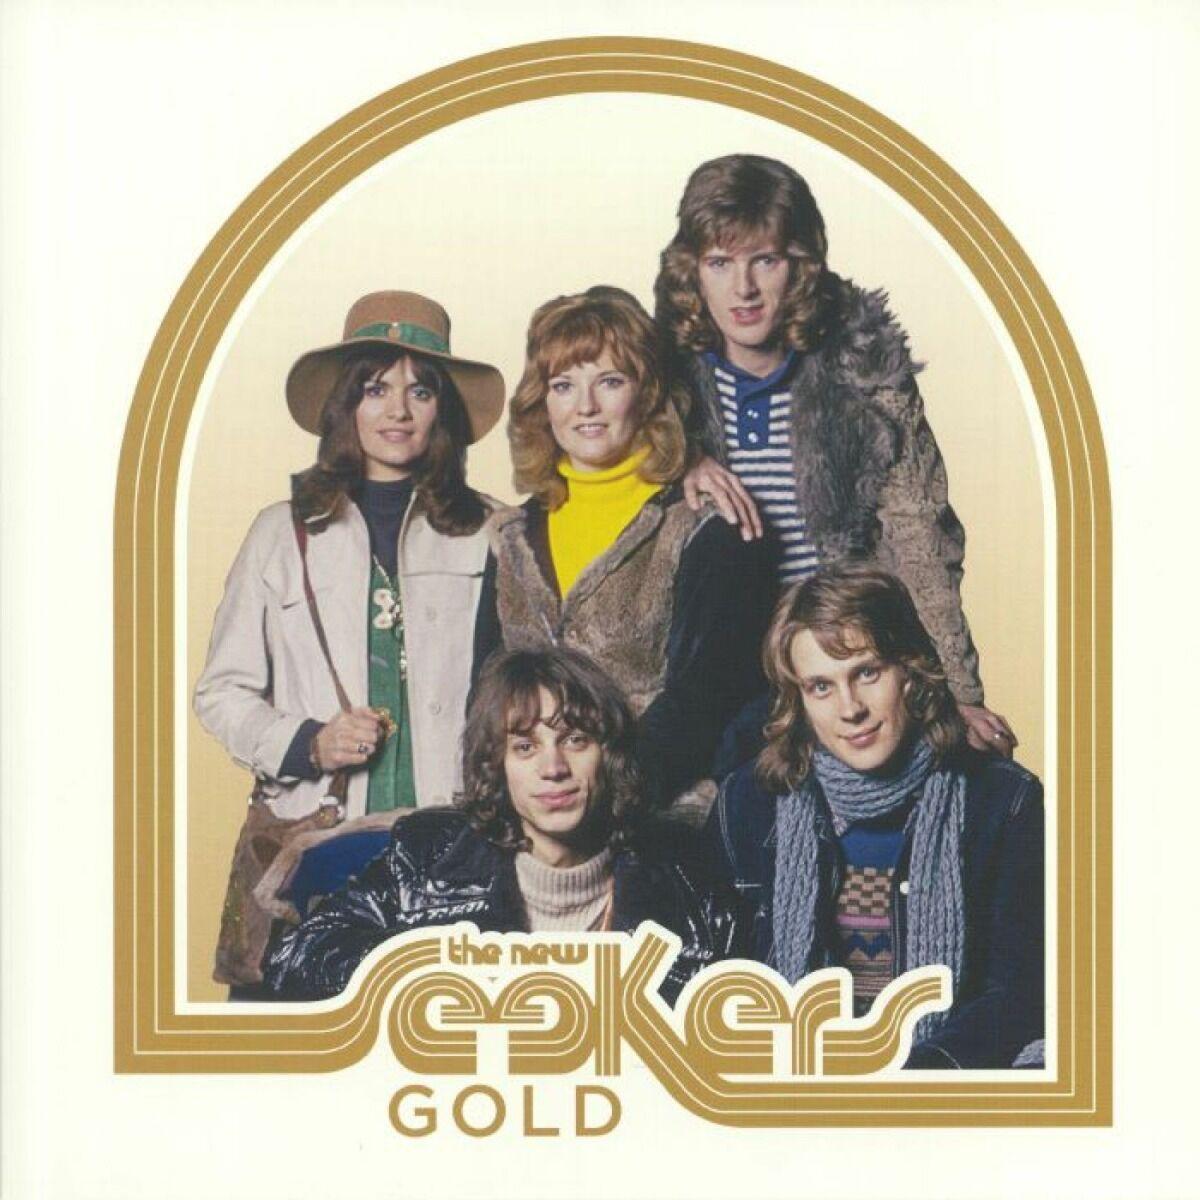 New Seekers Gold LP